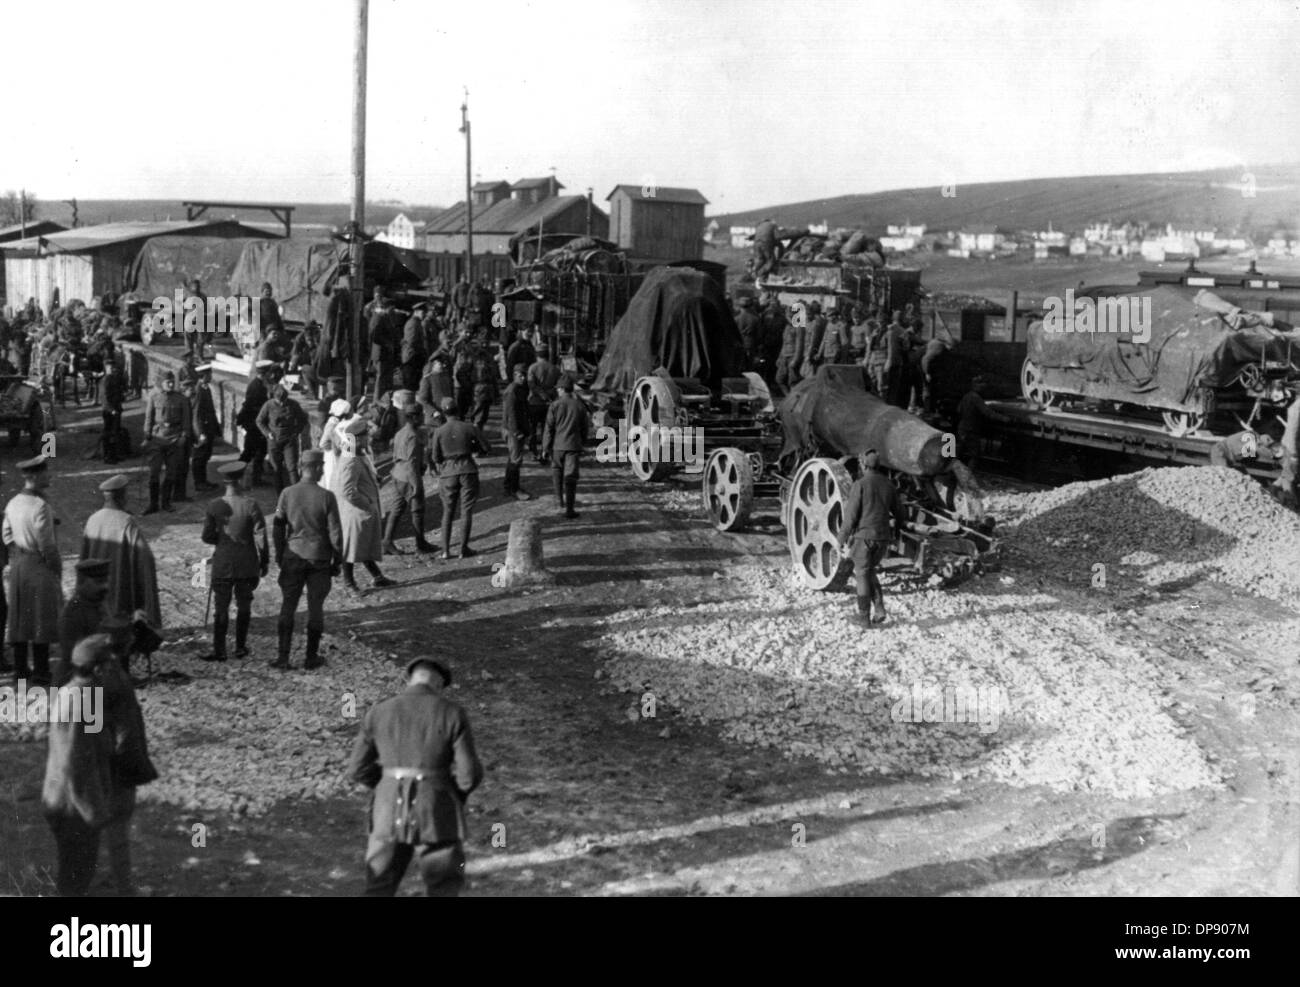 Heavy artillery is unloaded by soldiers of the Austrian-Hungarian army behind the front line. The deadly shots by Serbian nationalists on the Austrian heir to the throne Franz Ferdinand on the 28th of June in 1914 in Sarajevo caused the outbreak of the Great War, later to be called World War I, in August 1914. The Central Powers, namely Germany, Austria-Hungary and as well later the Ottoman Empire (Turkey) and Bulgaria against the Triple Entente, consisting of Great Britain, France and Russia, as well as numerous allies. The sad result of World War I, which ended with the defeat of the Centr Stock Photo